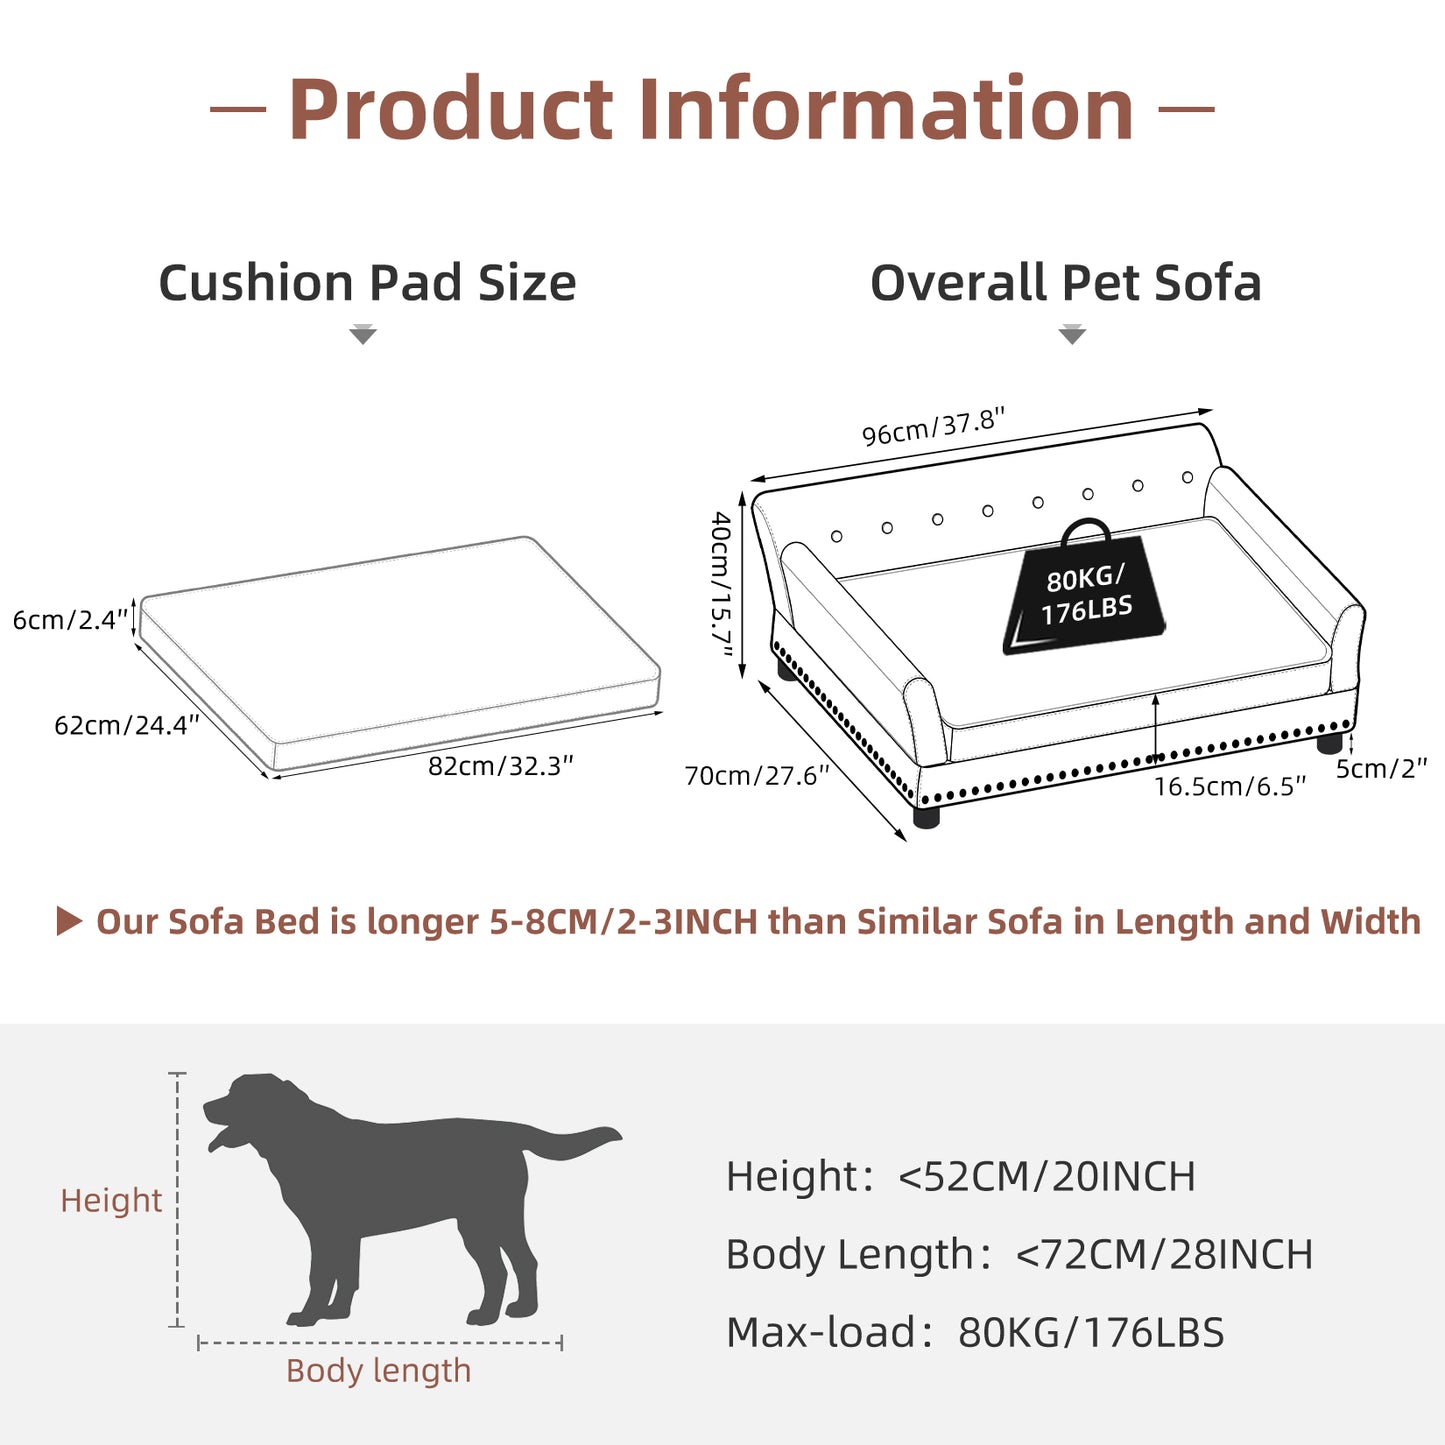 Luxury Large Dog Bed Pet Snuggle Sofa with Microfiber Leather Upholstered Sofa Bed